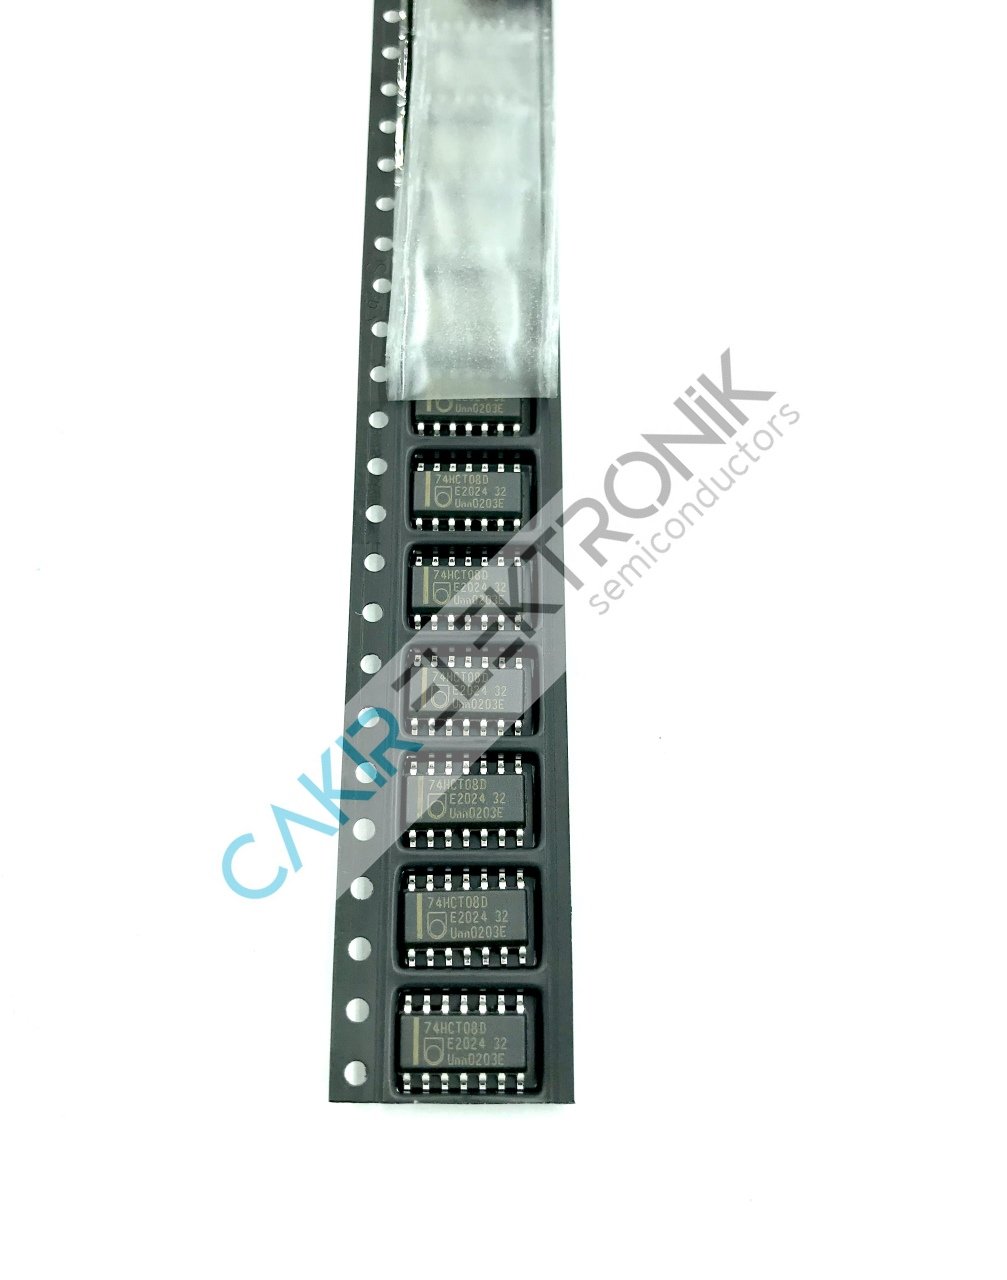 74HCT08D  - 74HCT08 - Quad 2-input AND gate - SOİC14